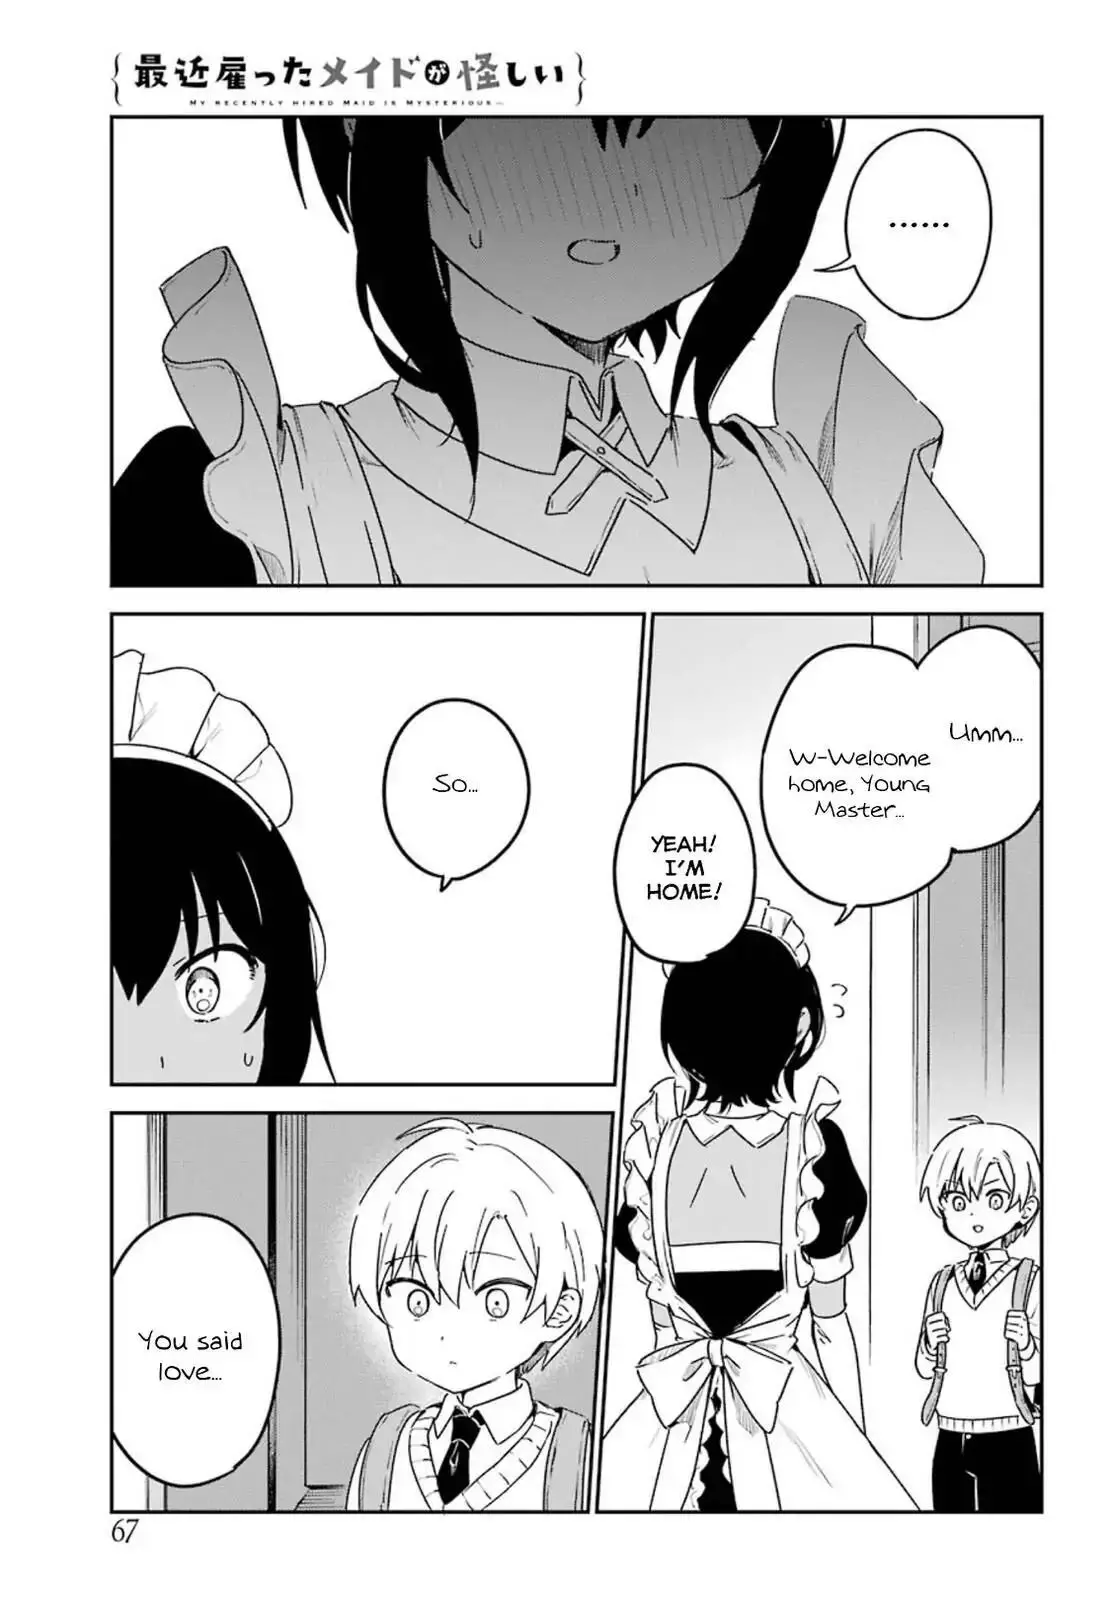 My Recently Hired Maid Is Suspicious - 43 page 6-9e19fe5d